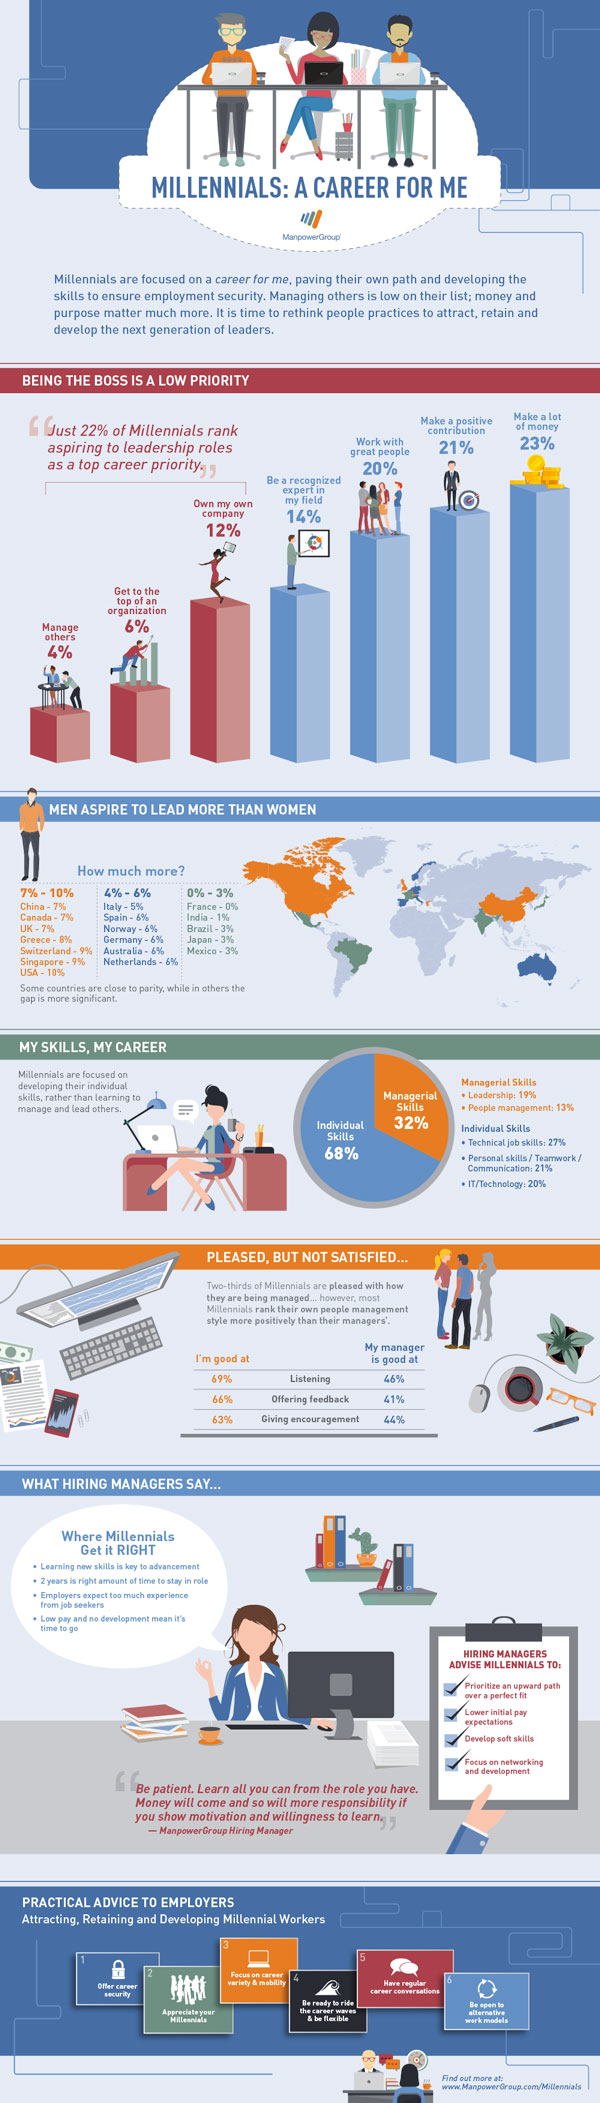 the image is a comparison of Millennials' career aspirations and hiring managers' expectations. Here's what the text in the image says: Millennials: A Career for Me Being the boss is a low priority Only 22% of Millennials rank aspiring to leadership roles. Skills matter more than money 68% want to be pleased but not satisfied with their work. (This likely means they prioritize interesting or meaningful work over just high salaries) 32% prioritize money over feeling pleased with their work. What Hiring Managers Say Employers are concerned Millennials may not be interested in management positions. Employers may find it challenging to motivate Millennials who don't prioritize high salaries. Practical Advice to Employers The text cuts off here, but it likely offers employers guidance on how to attract and retain millennial employees. Overall, the image suggests a potential mismatch between what millennial workers prioritize in a career and what traditional management styles emphasize.